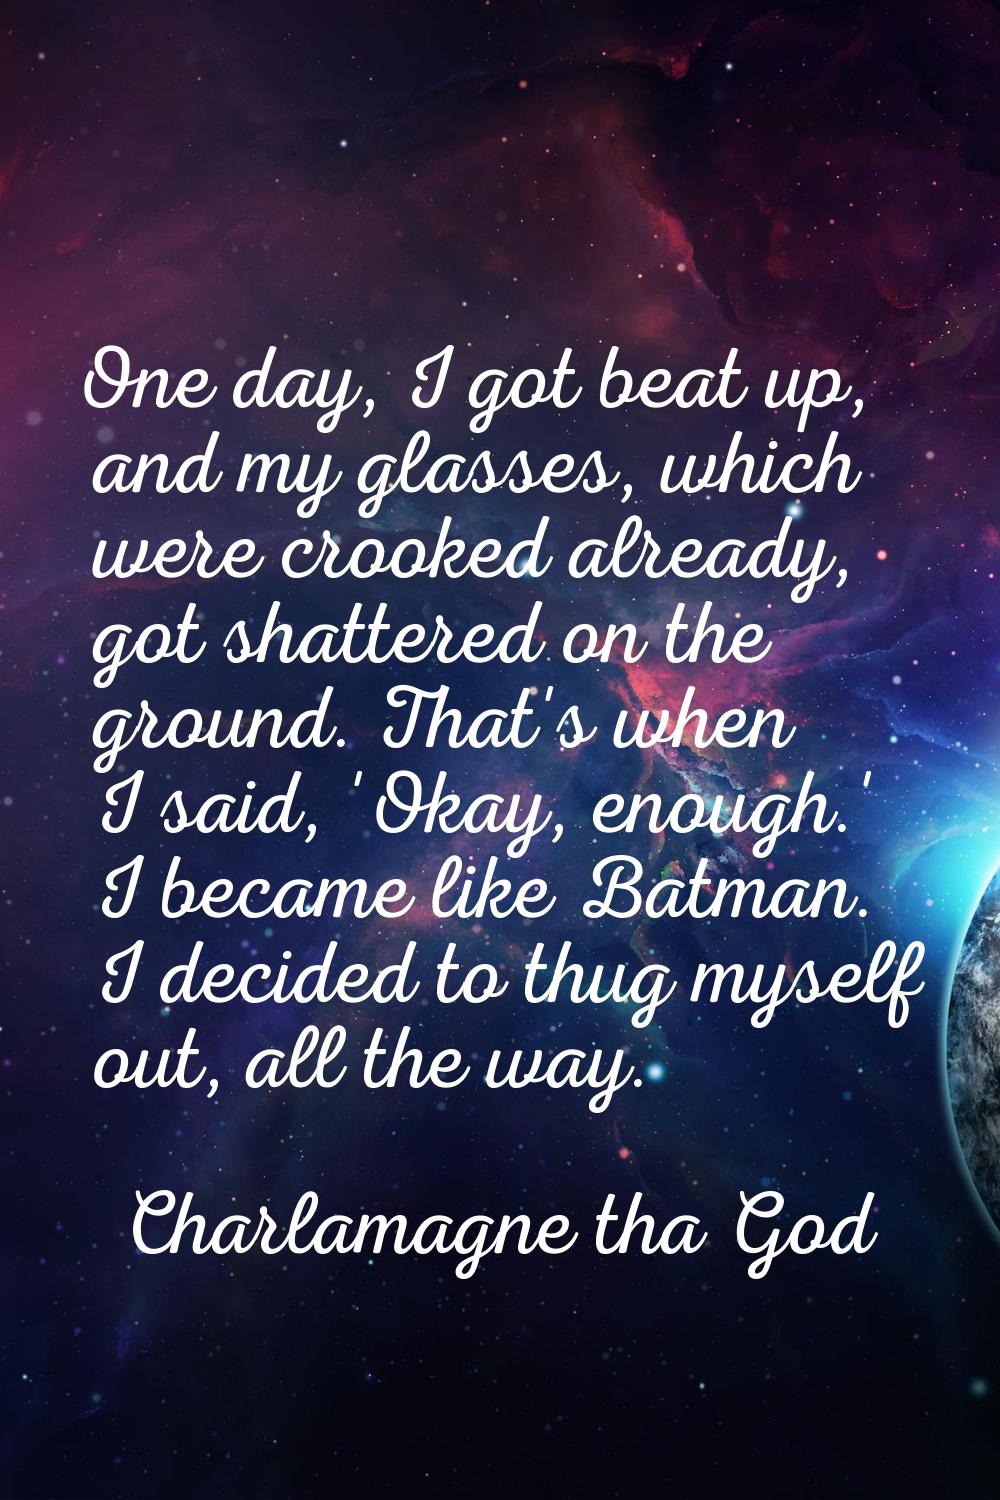 One day, I got beat up, and my glasses, which were crooked already, got shattered on the ground. Th